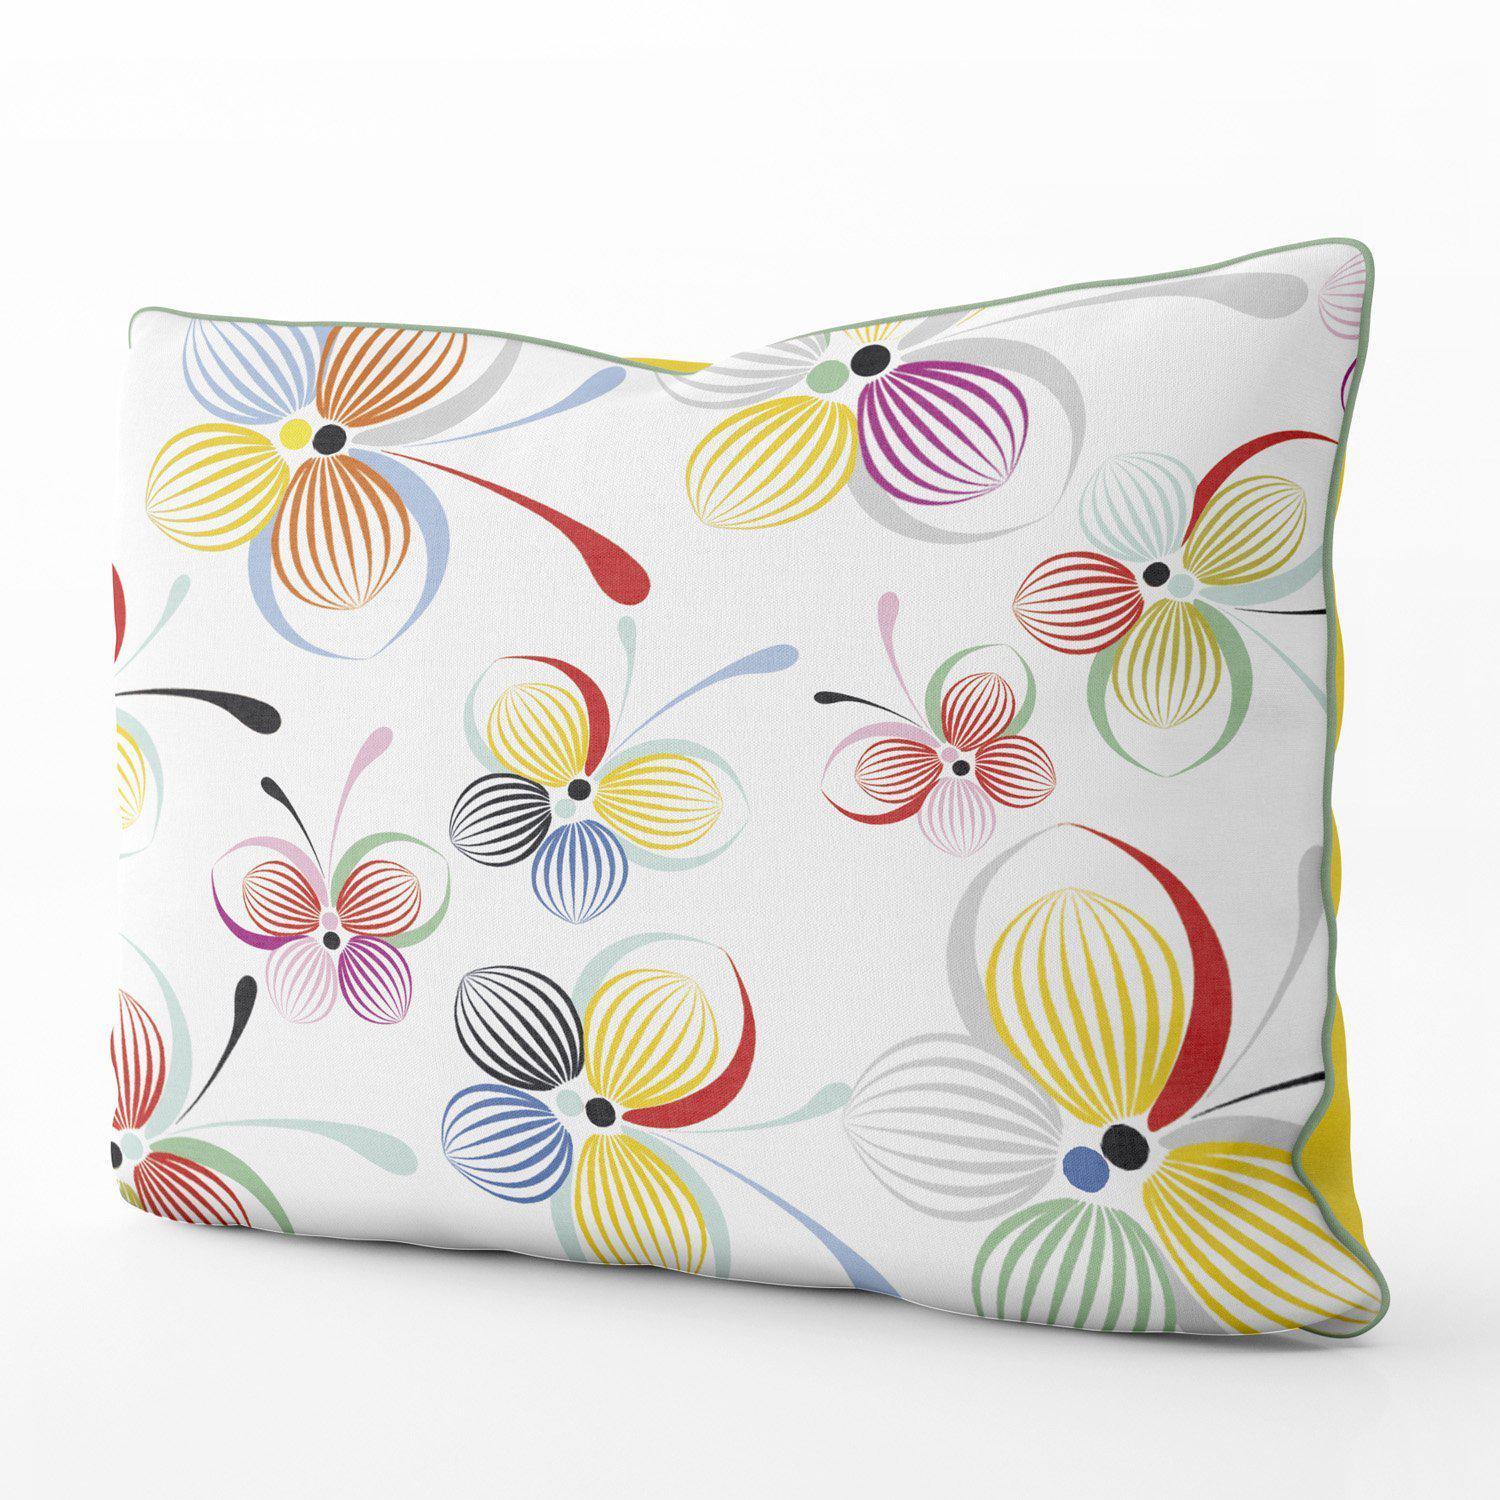 Bubbly Butterflies (White) - Funky Art Cushion - Perfect Day - House Of Turnowsky Pillows - Handmade Cushions UK - WeLoveCushions